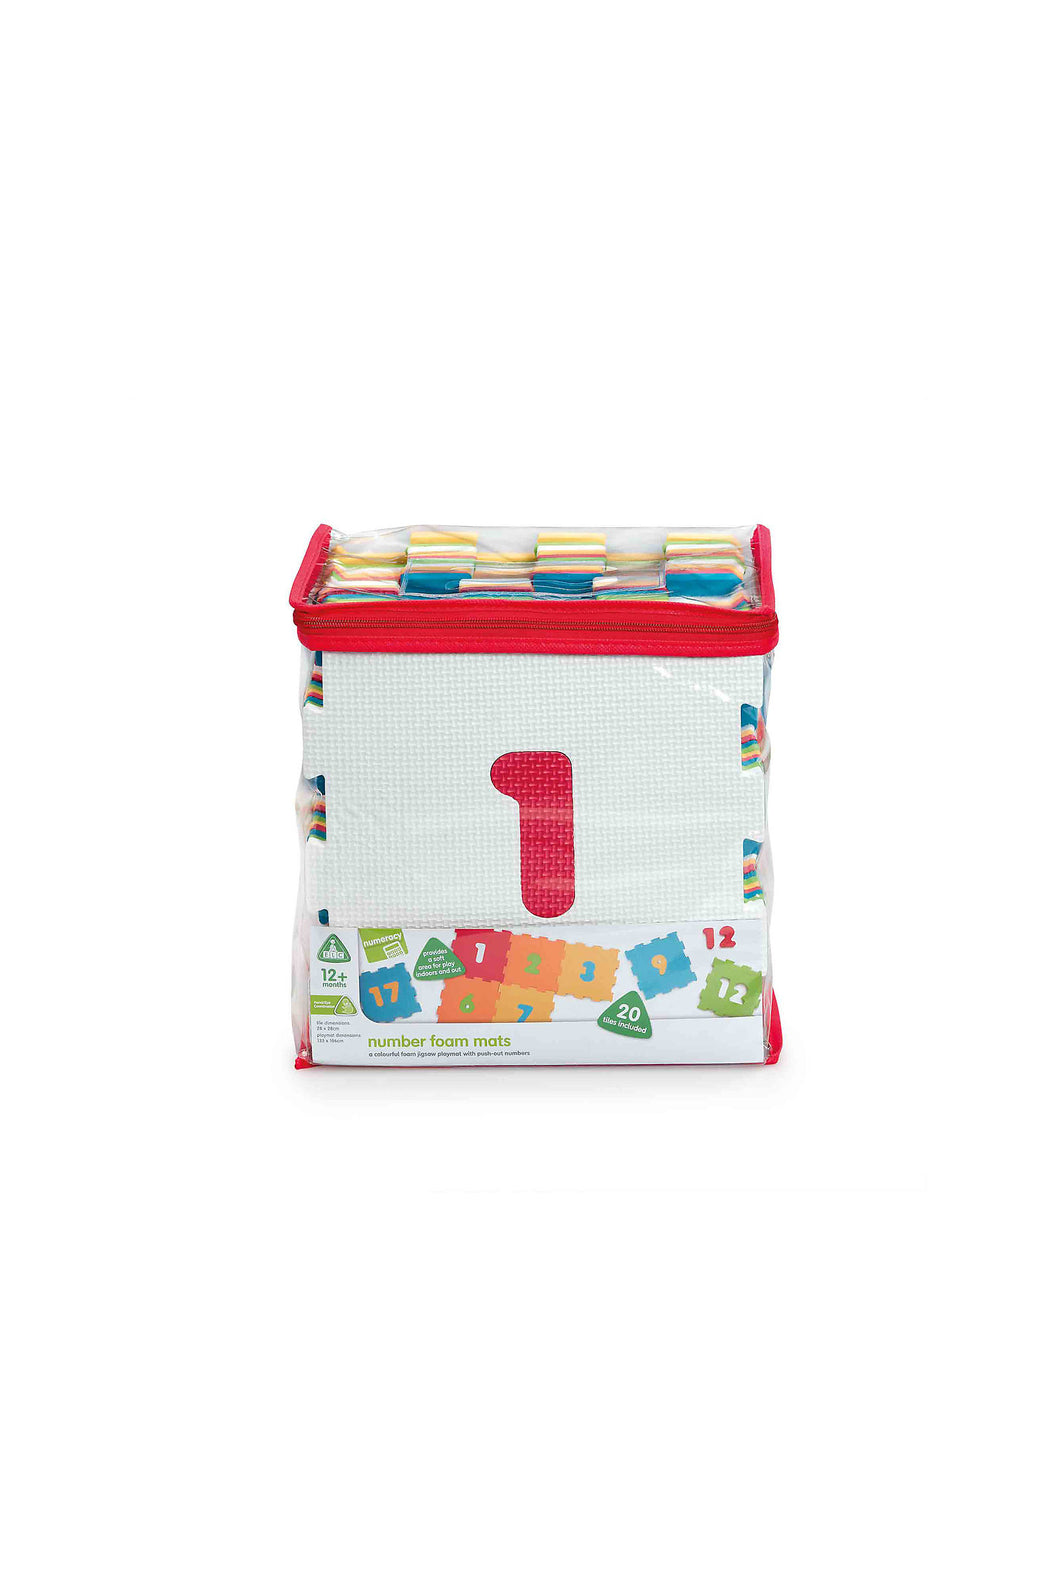 Early Learning Centre Number Foam Mat 1